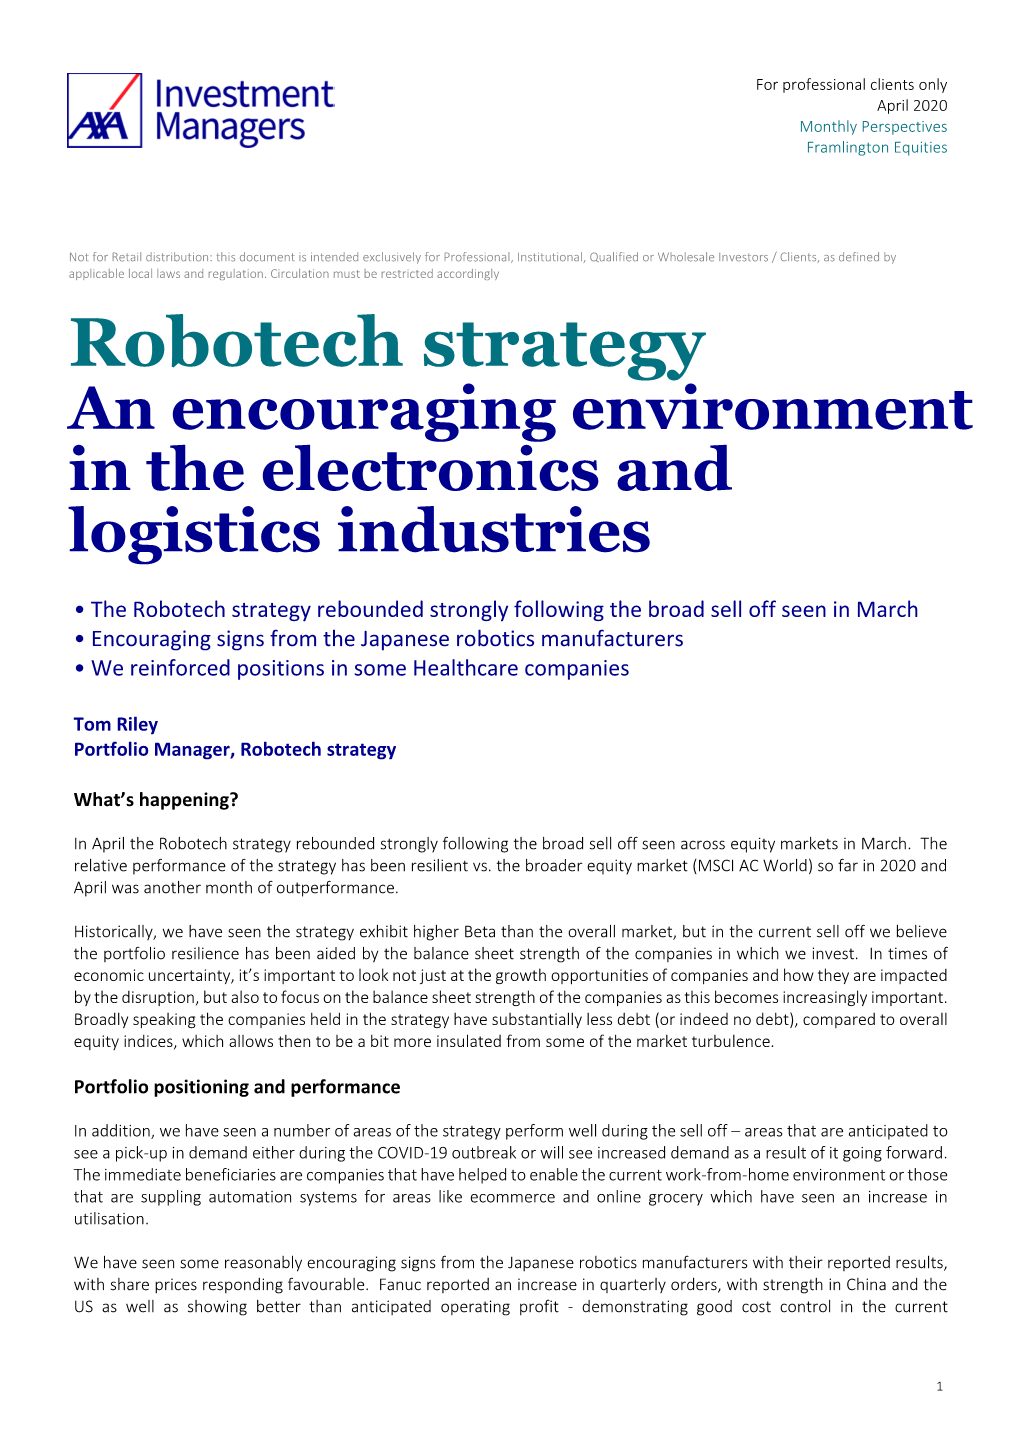 Robotech Strategy an Encouraging Environment in the Electronics and Logistics Industries